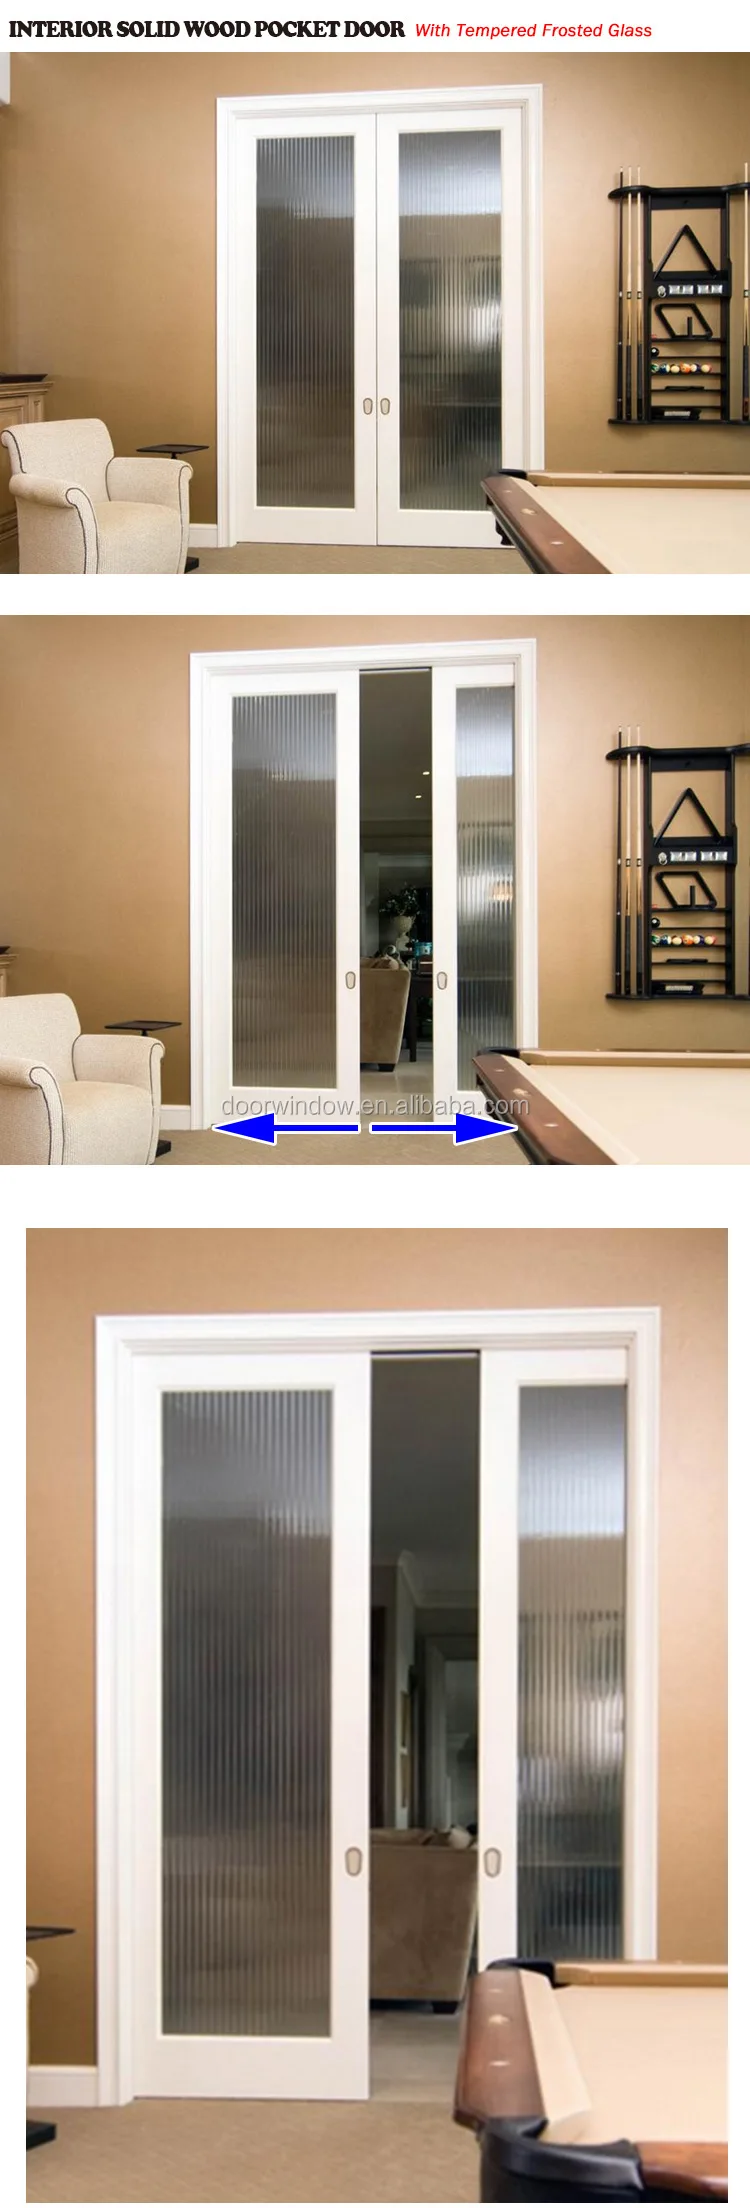 2018 New Design High Quality pocket doors lowes With Strong Hardware